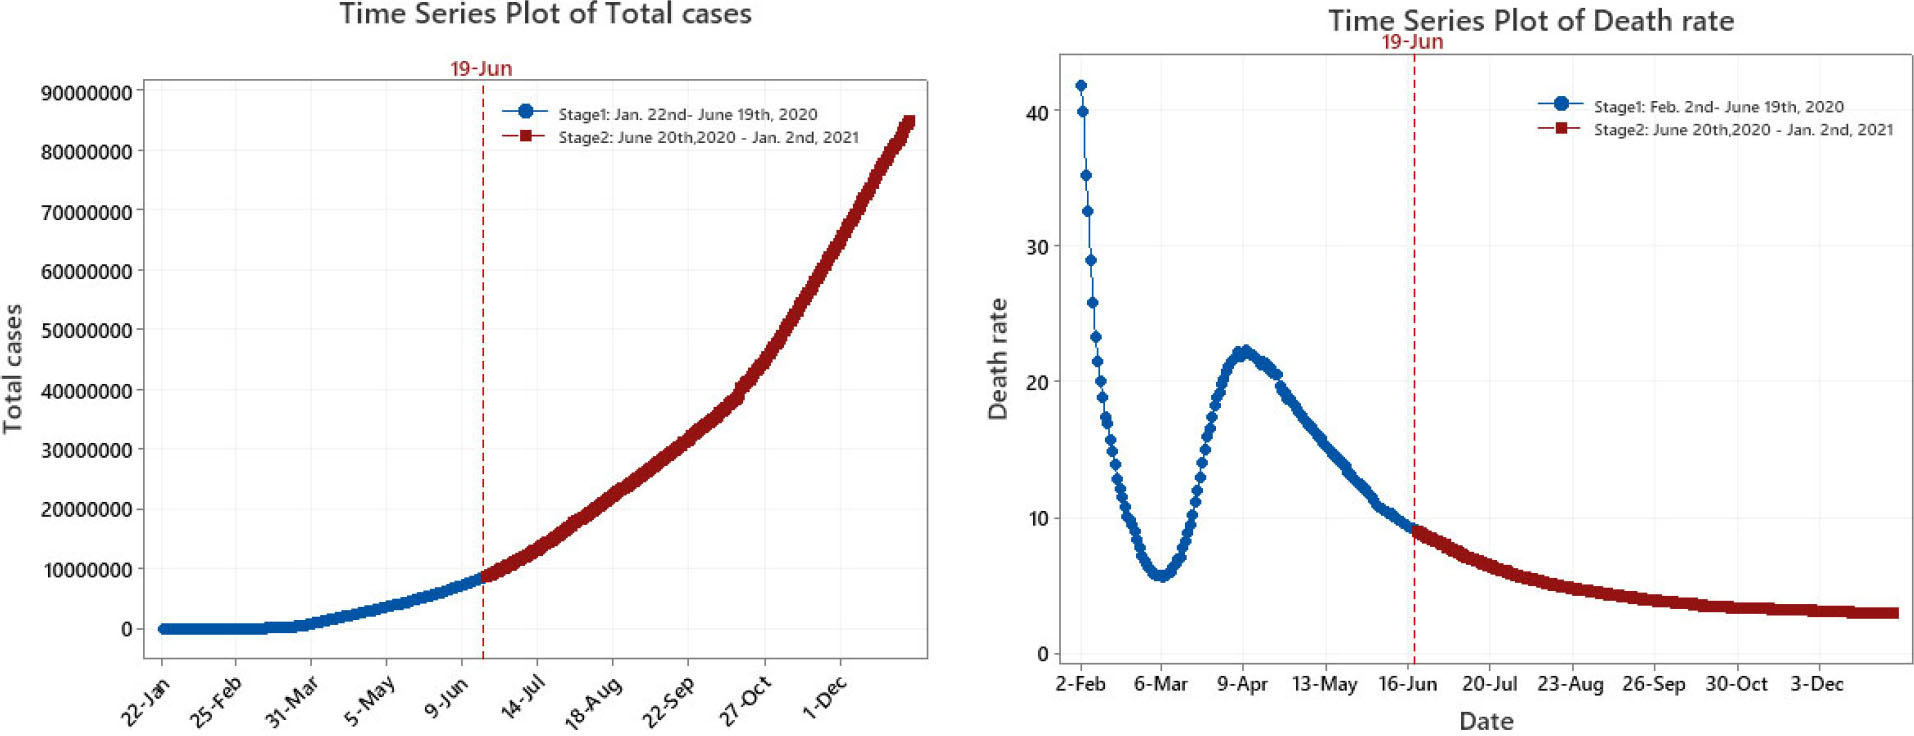 Actual data in total confirmed cases and death rate.